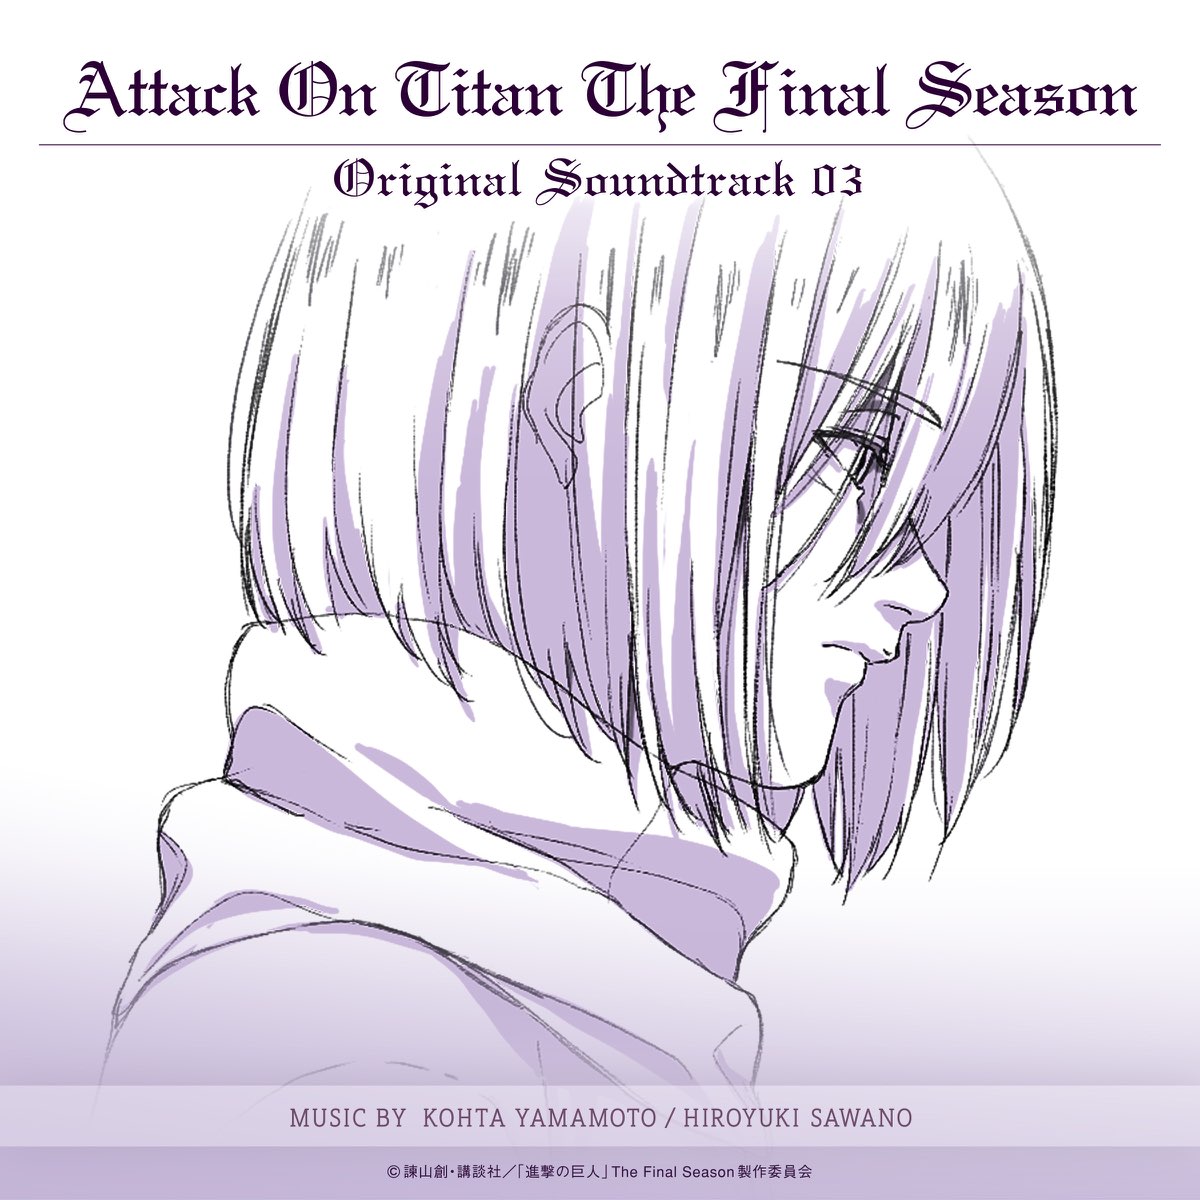 The Music & OST in Attack on Titan